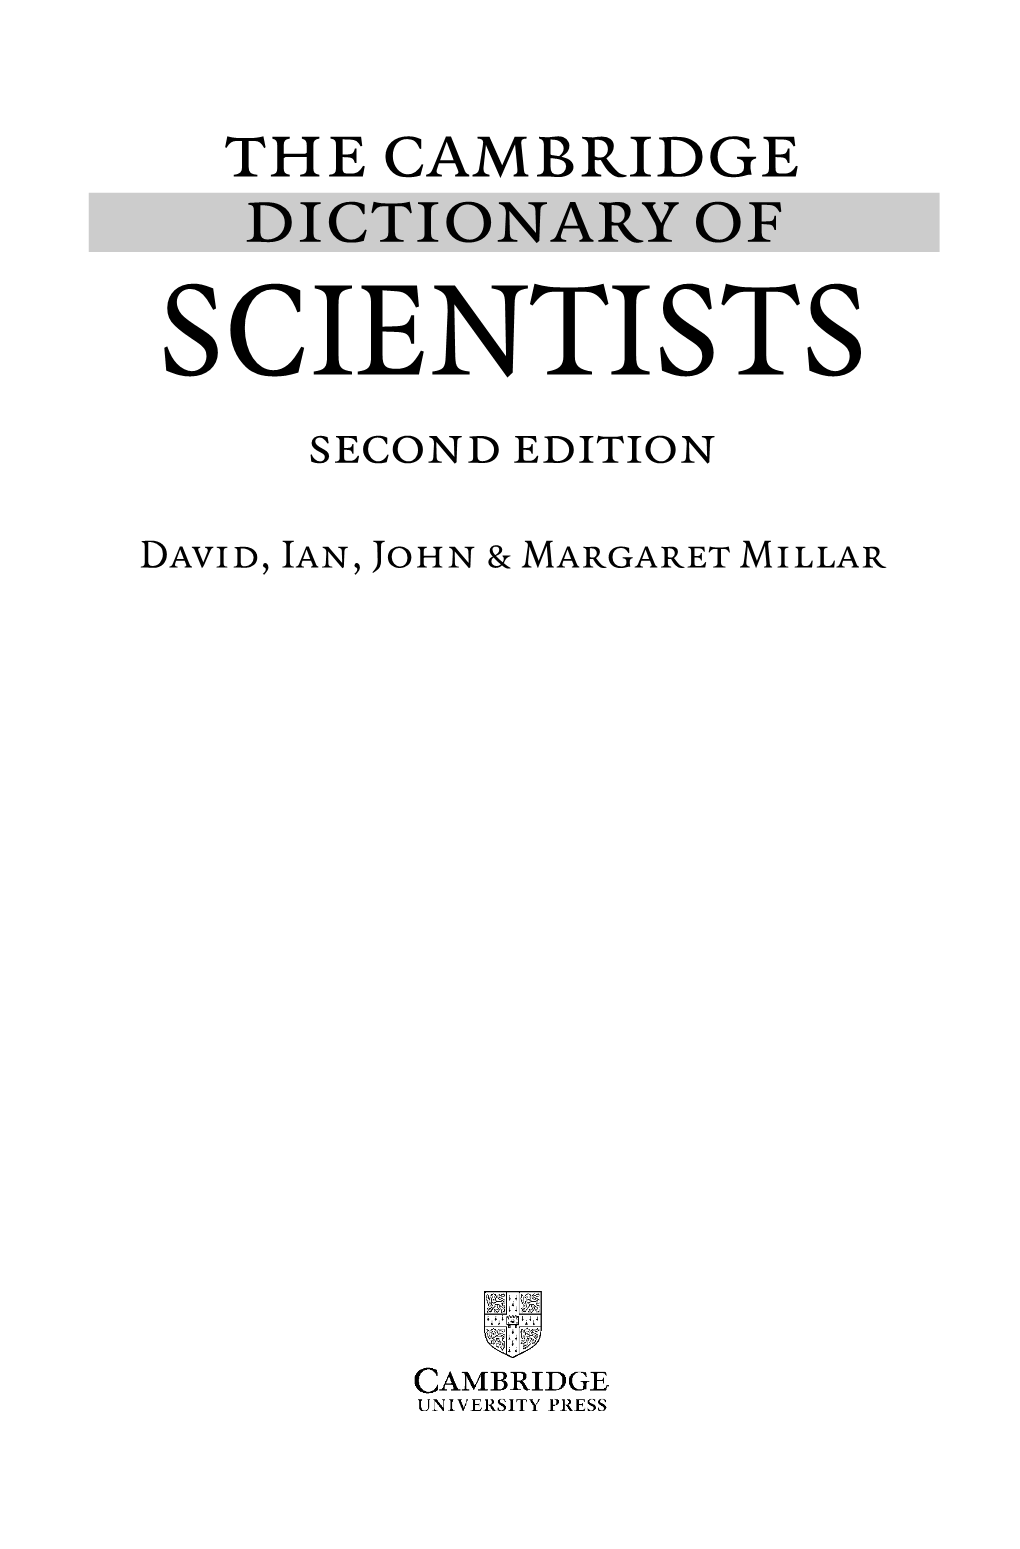 SCIENTISTS Second Edition